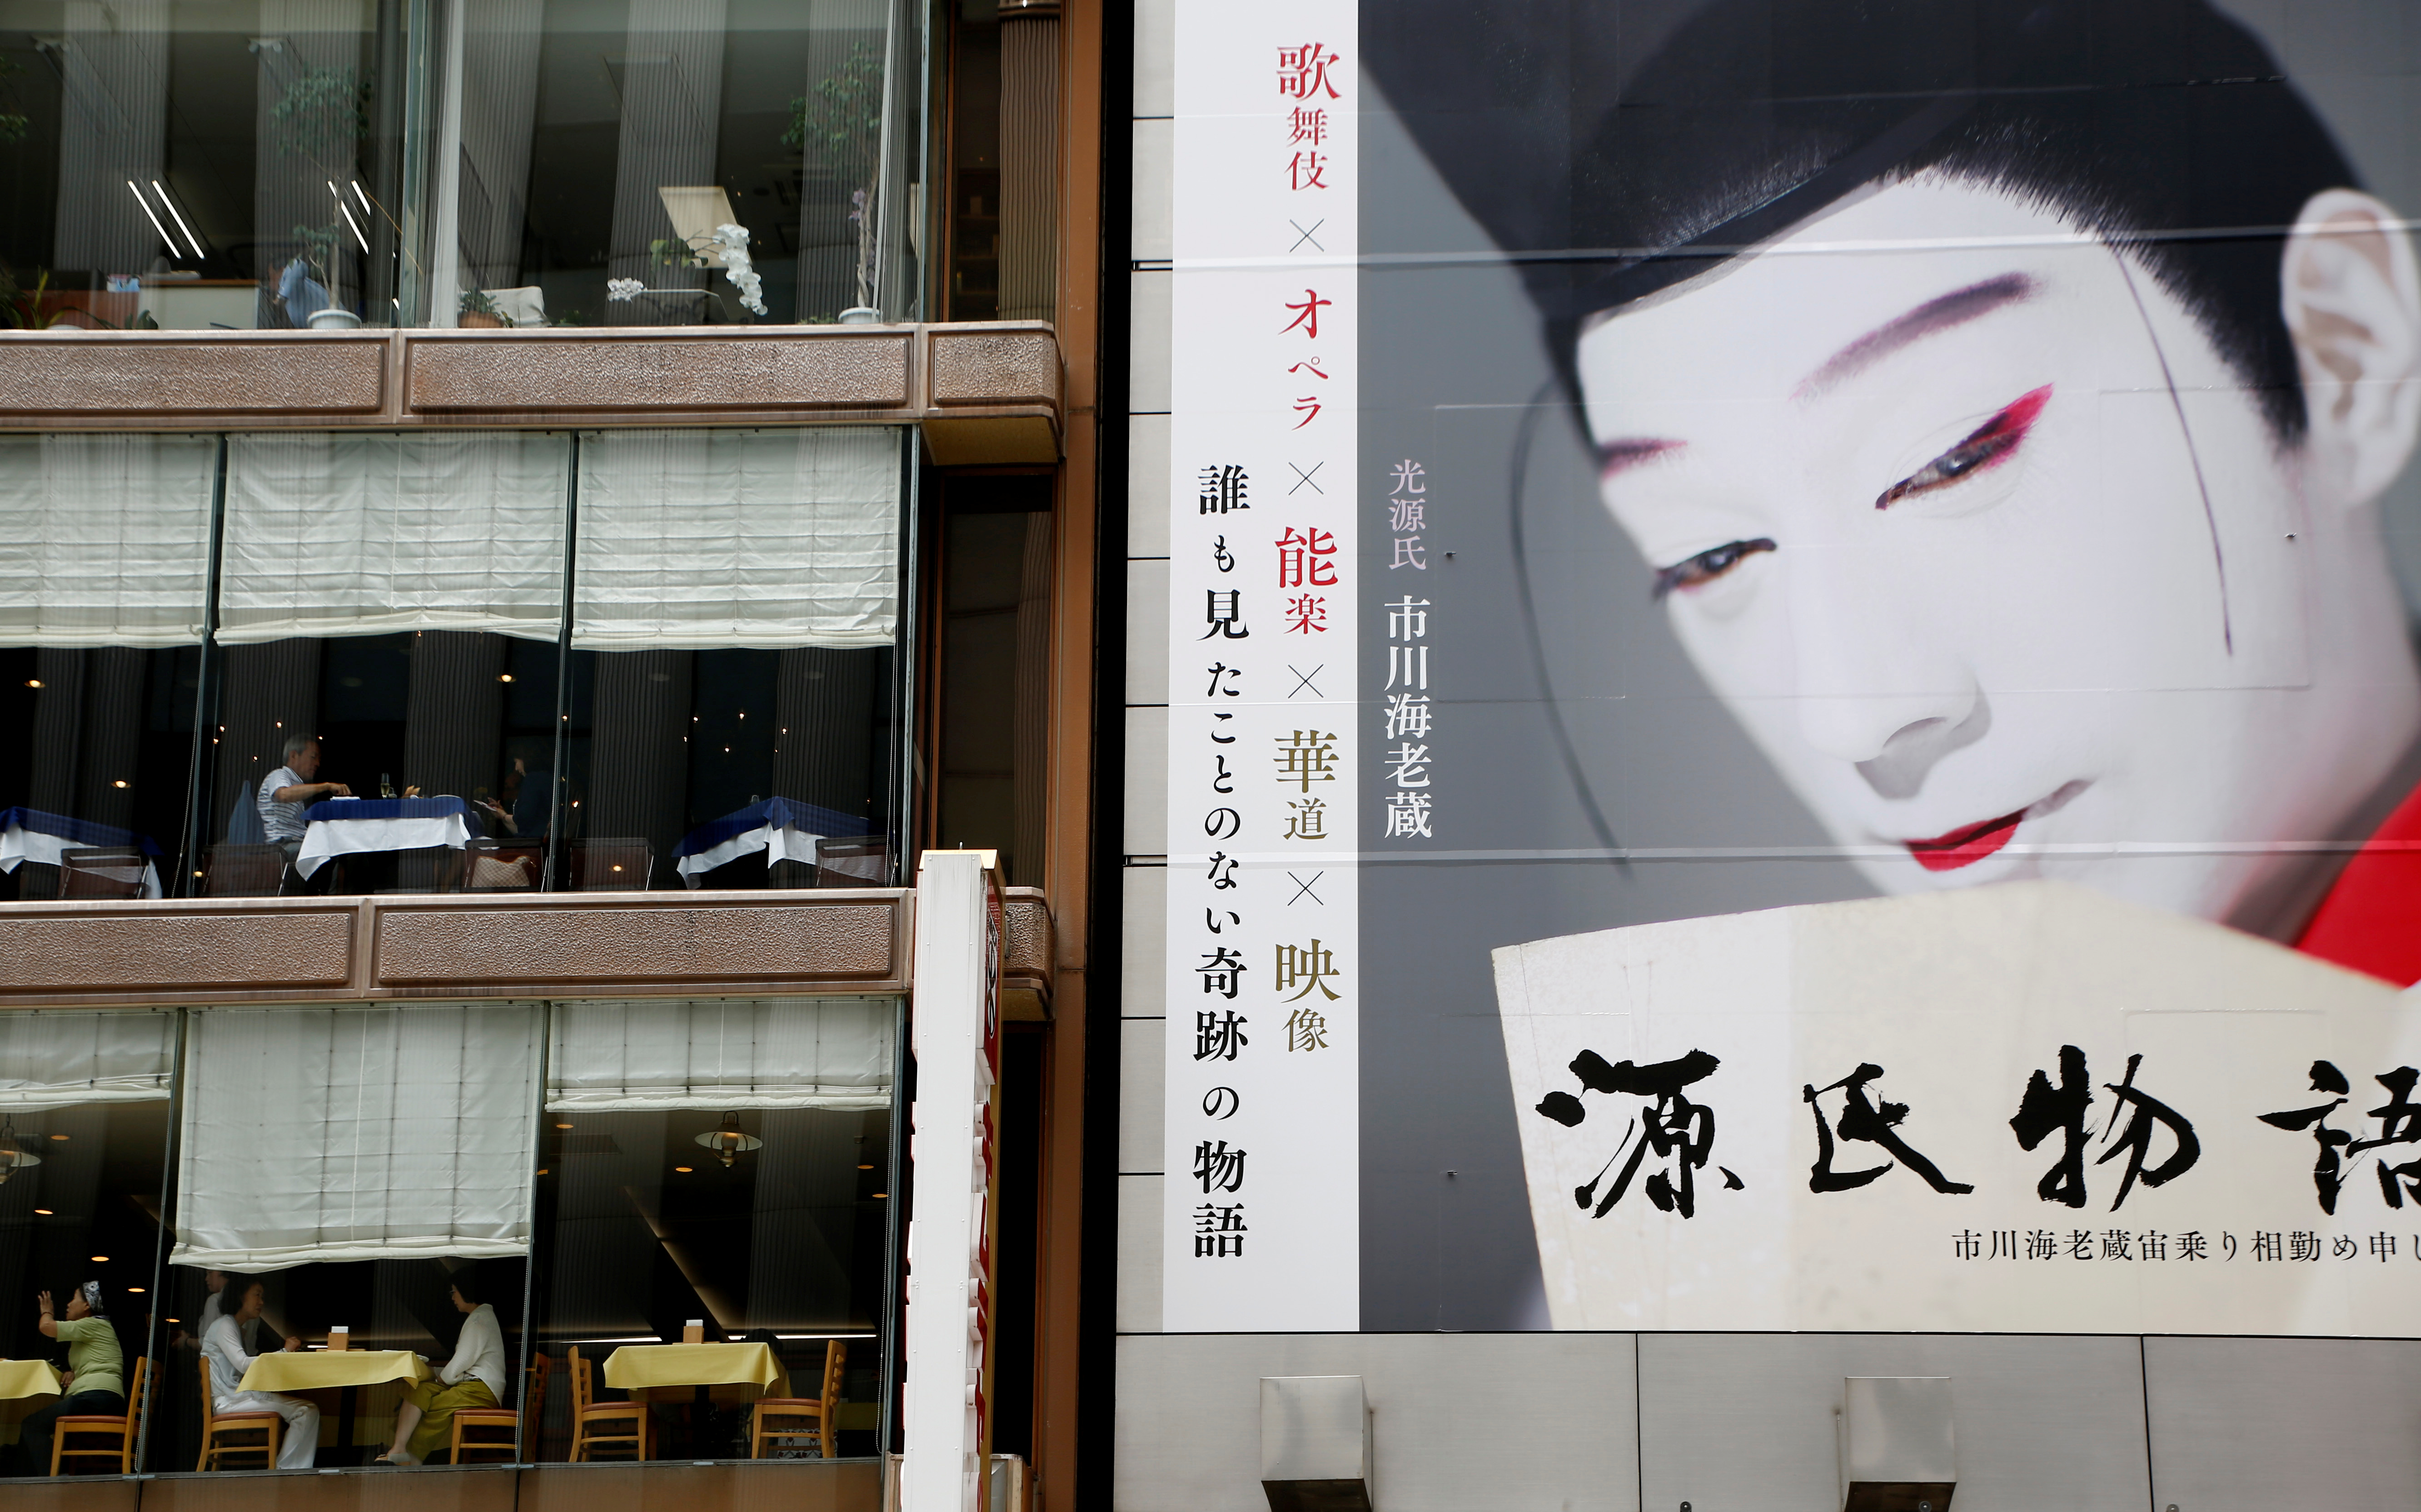 Customers have lunch at restaurants next to a record shop which has a large poster on its wall in Tokyo, Japan